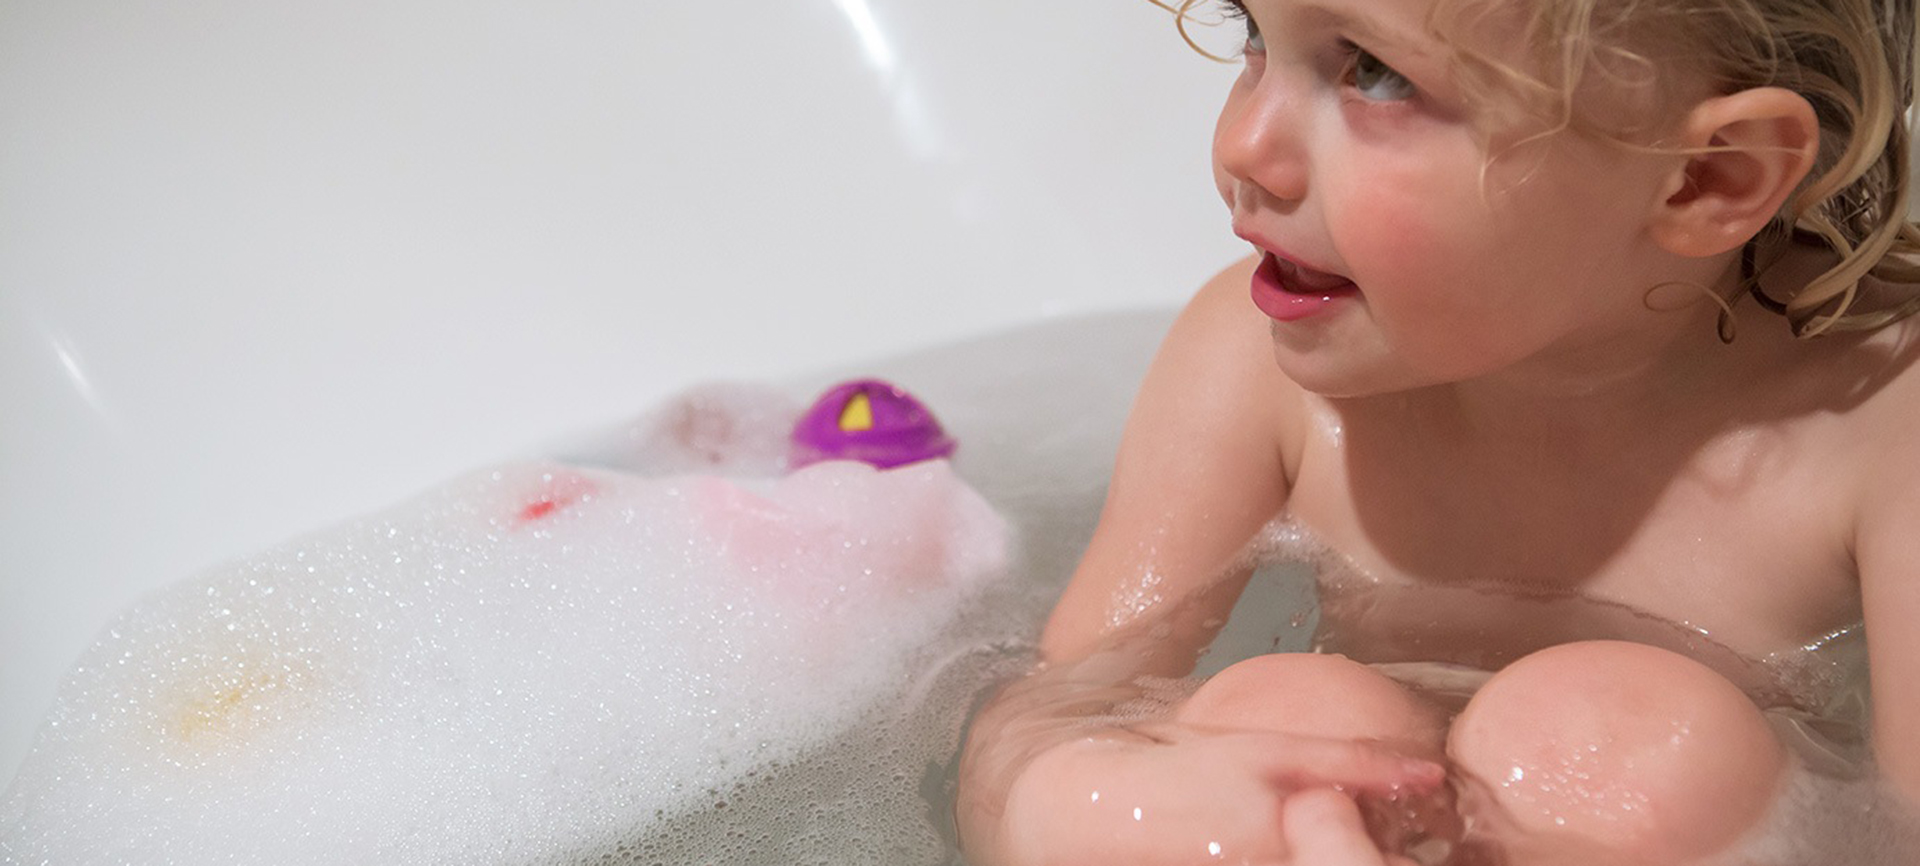 Toddler enjoying a hot bath heated with Trustpower's reticulated gas supply